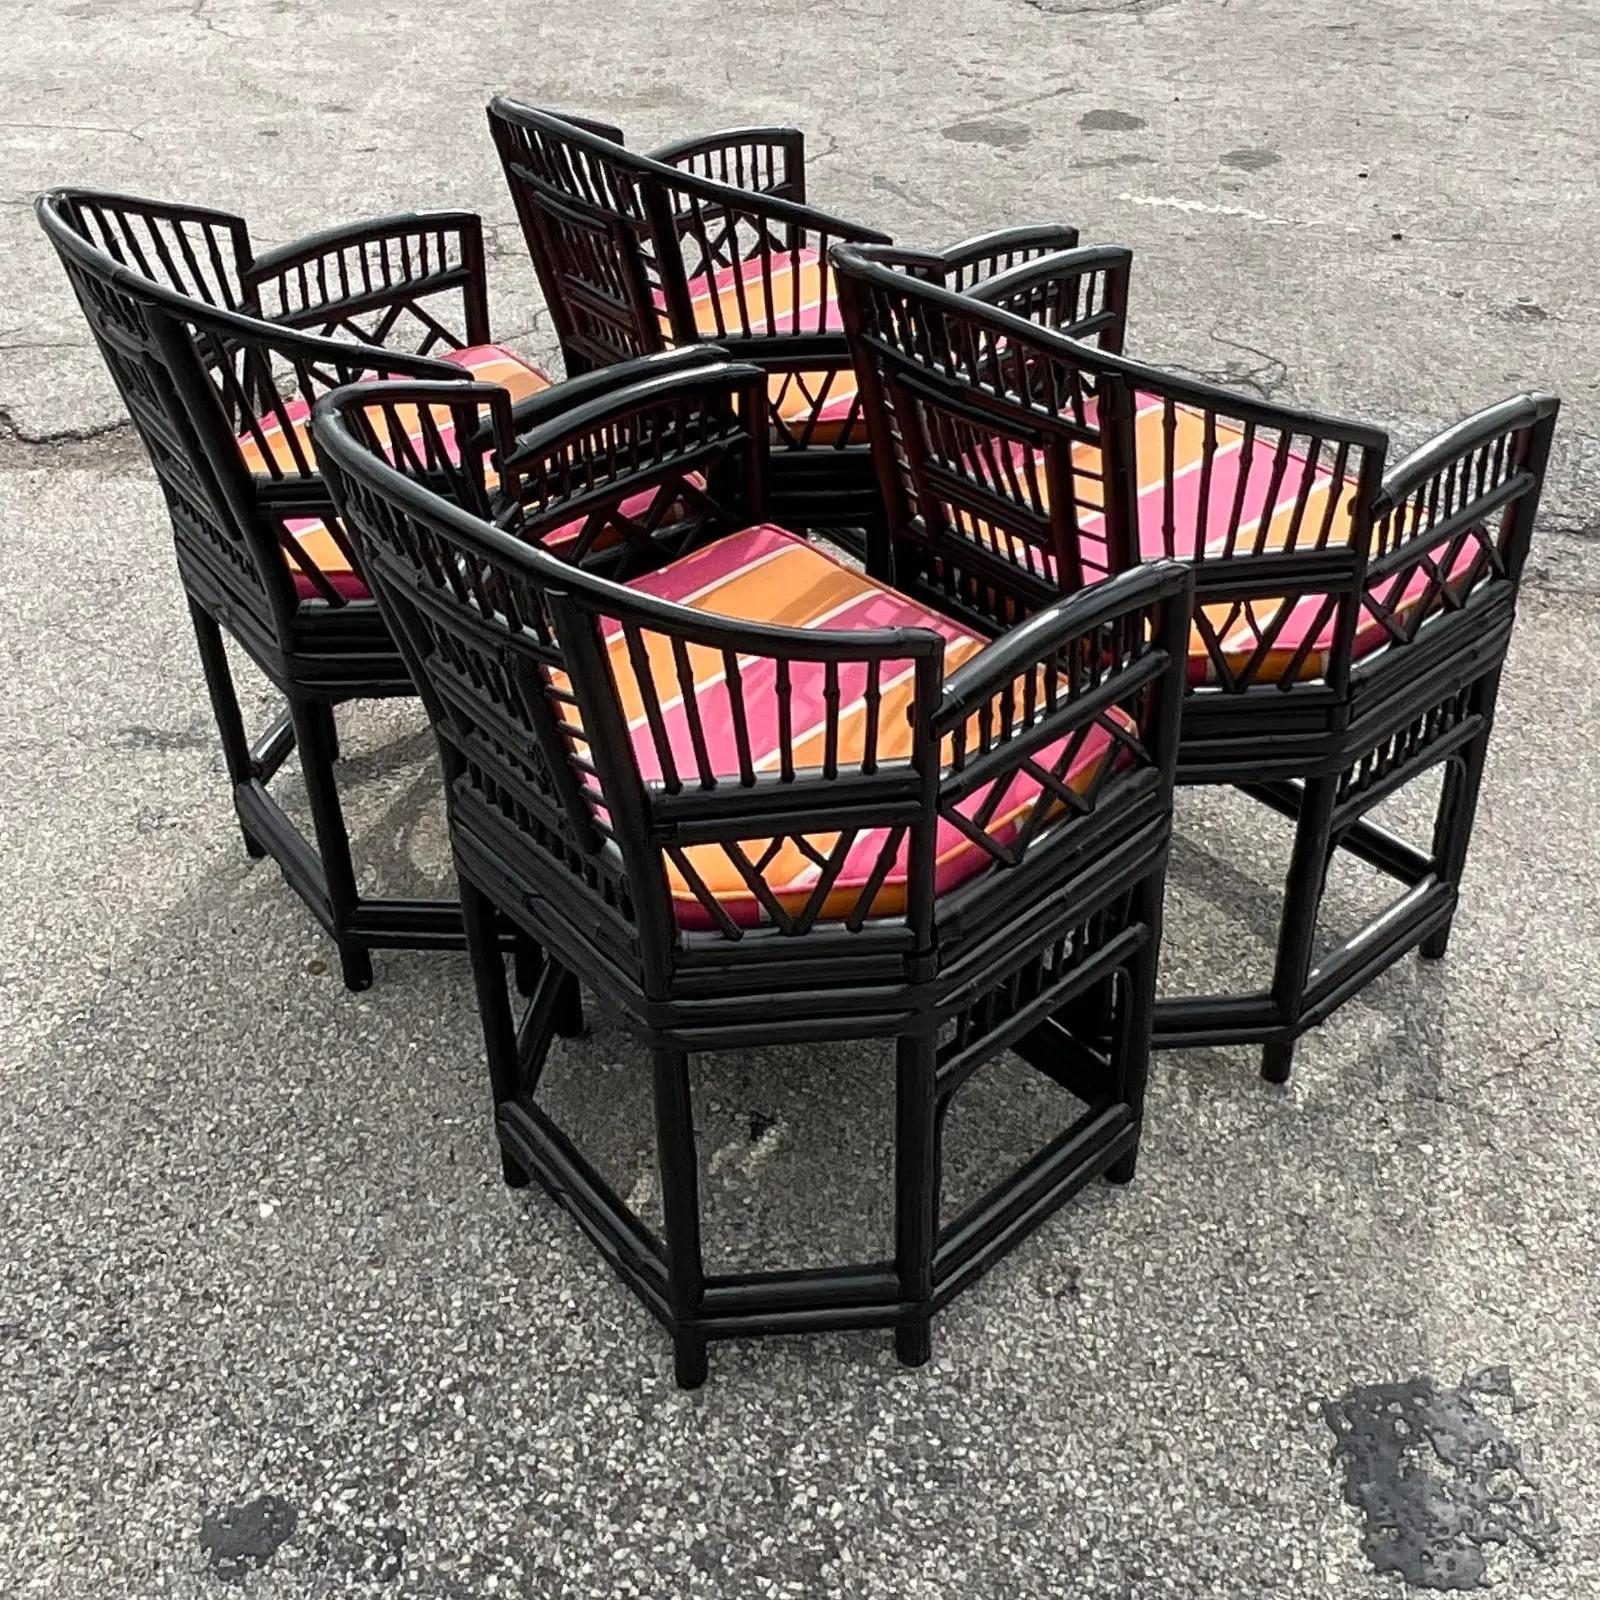 A fantastic set of 4 vintage Coastal dining chairs. Chic Brighton Pavilion design painted a semi gloss black. Bright upholstered seats that can be removed to reveal an inset cane panel. Acquired from a Palm Beach estate.